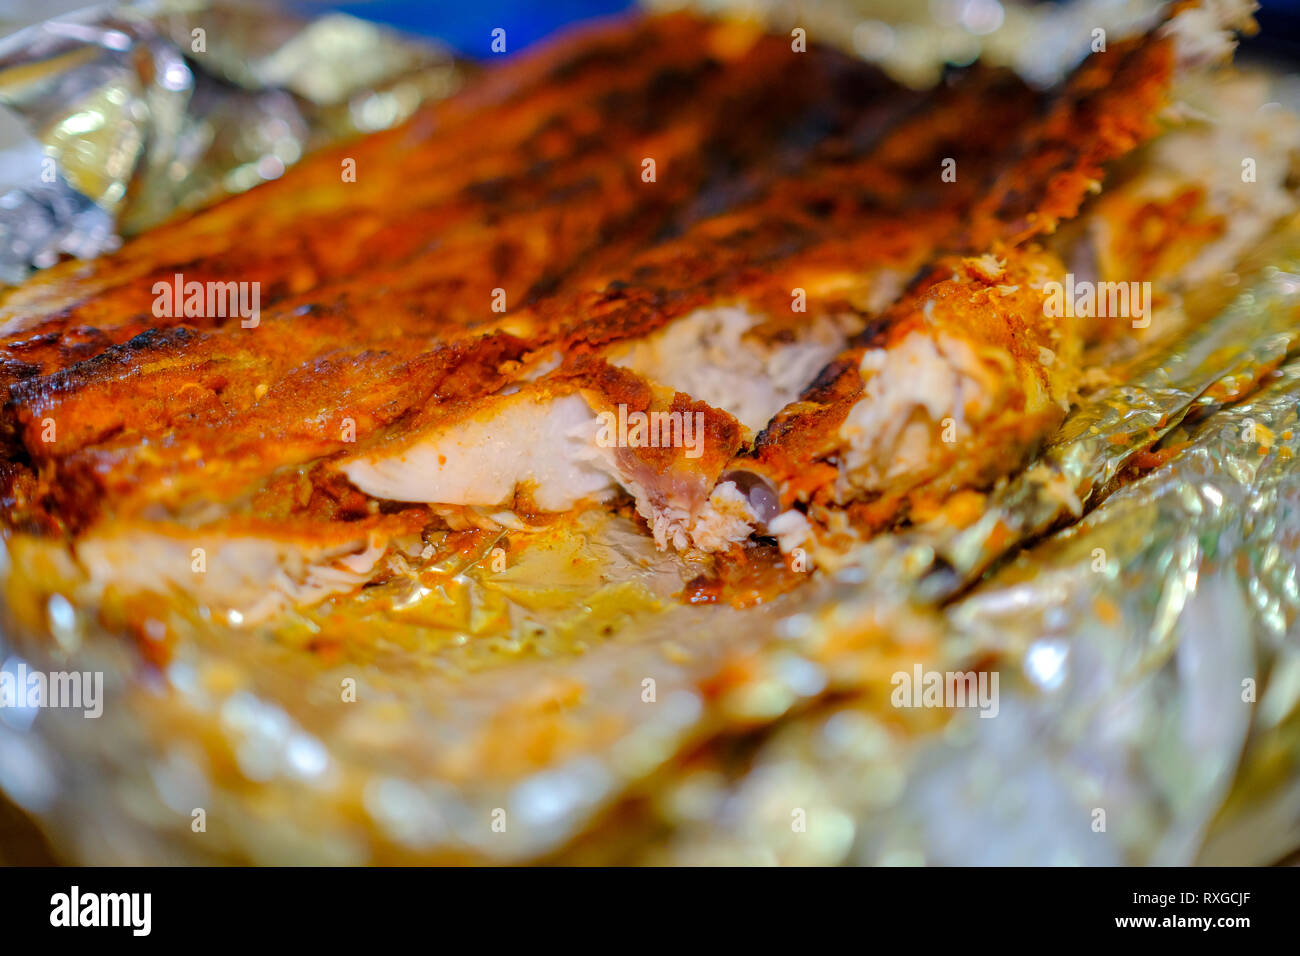 Detail shot of a grilled fish Stock Photo